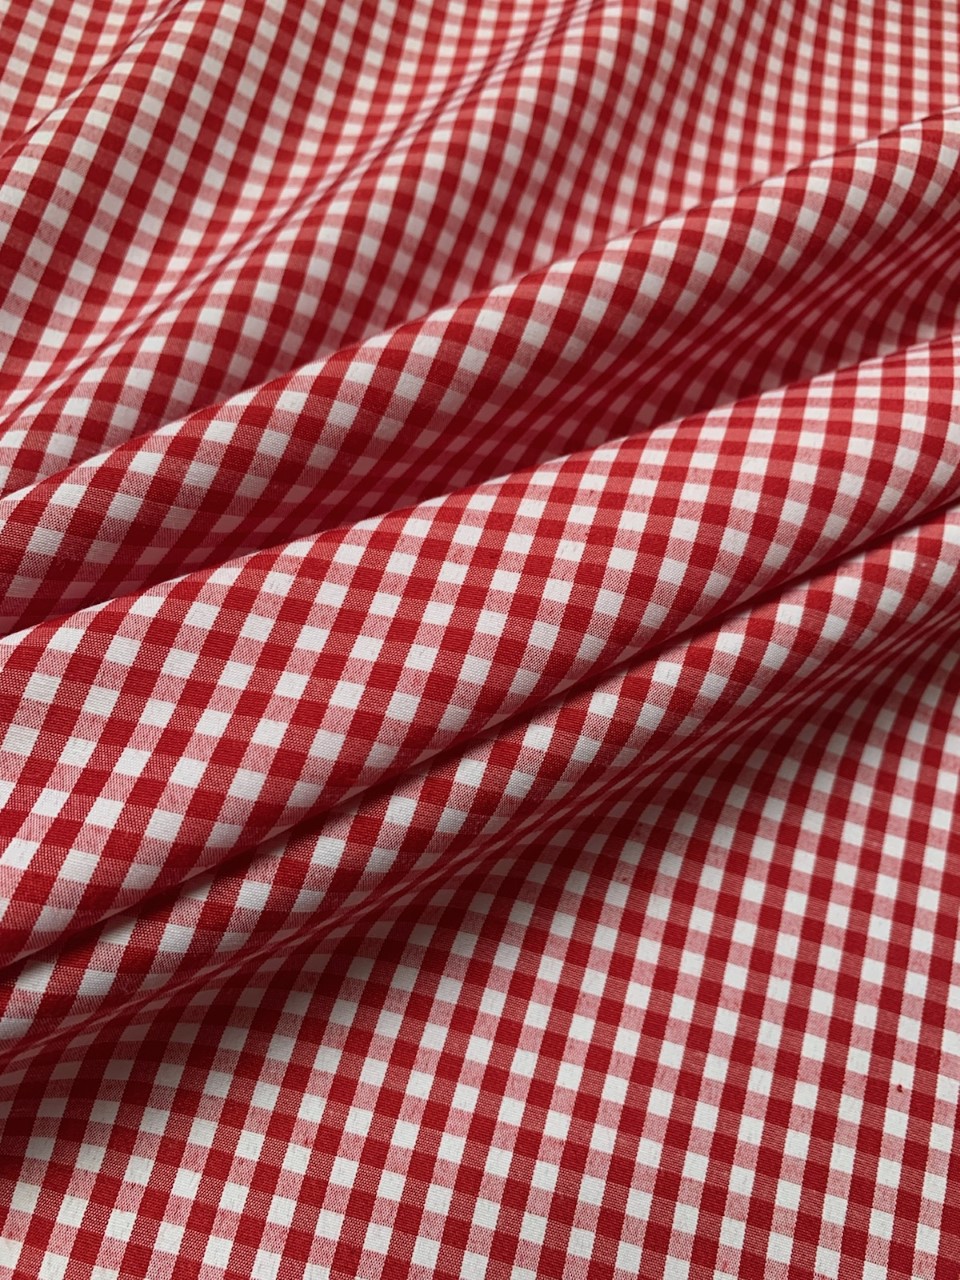 1/8" Red Gingham Fabric 60" Wide By The Yard Poly Cotton Blend